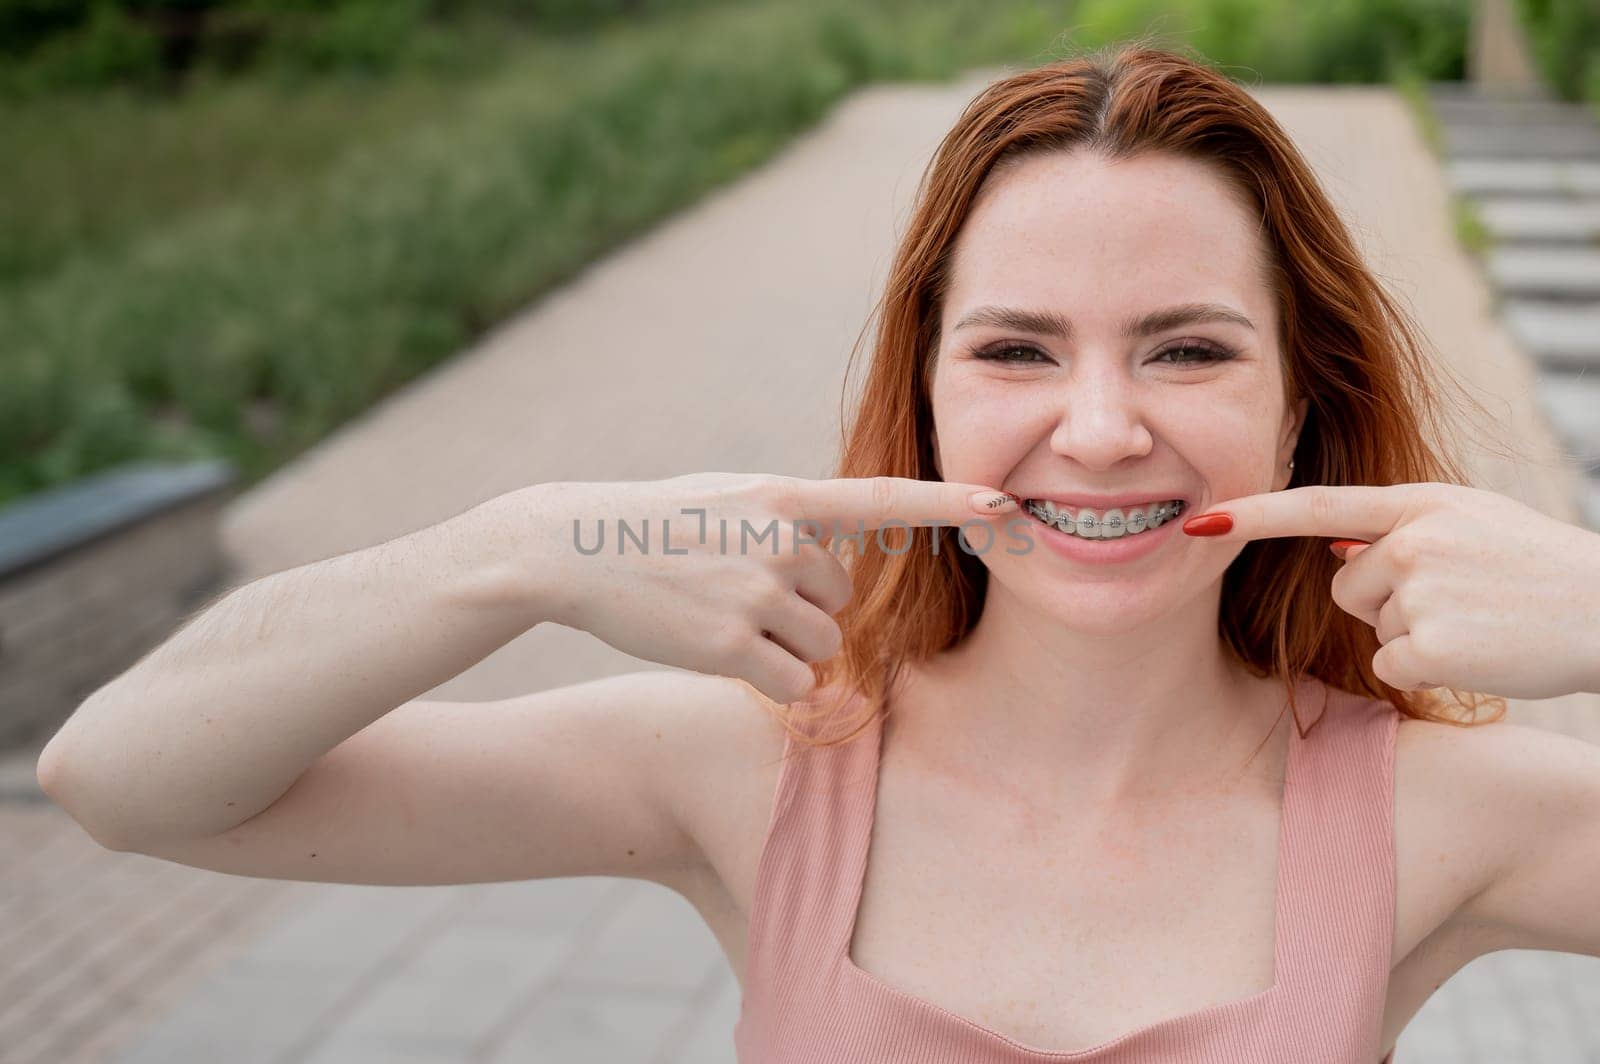 Young red-haired woman with braces on her teeth point to a smile outdoors in summer by mrwed54